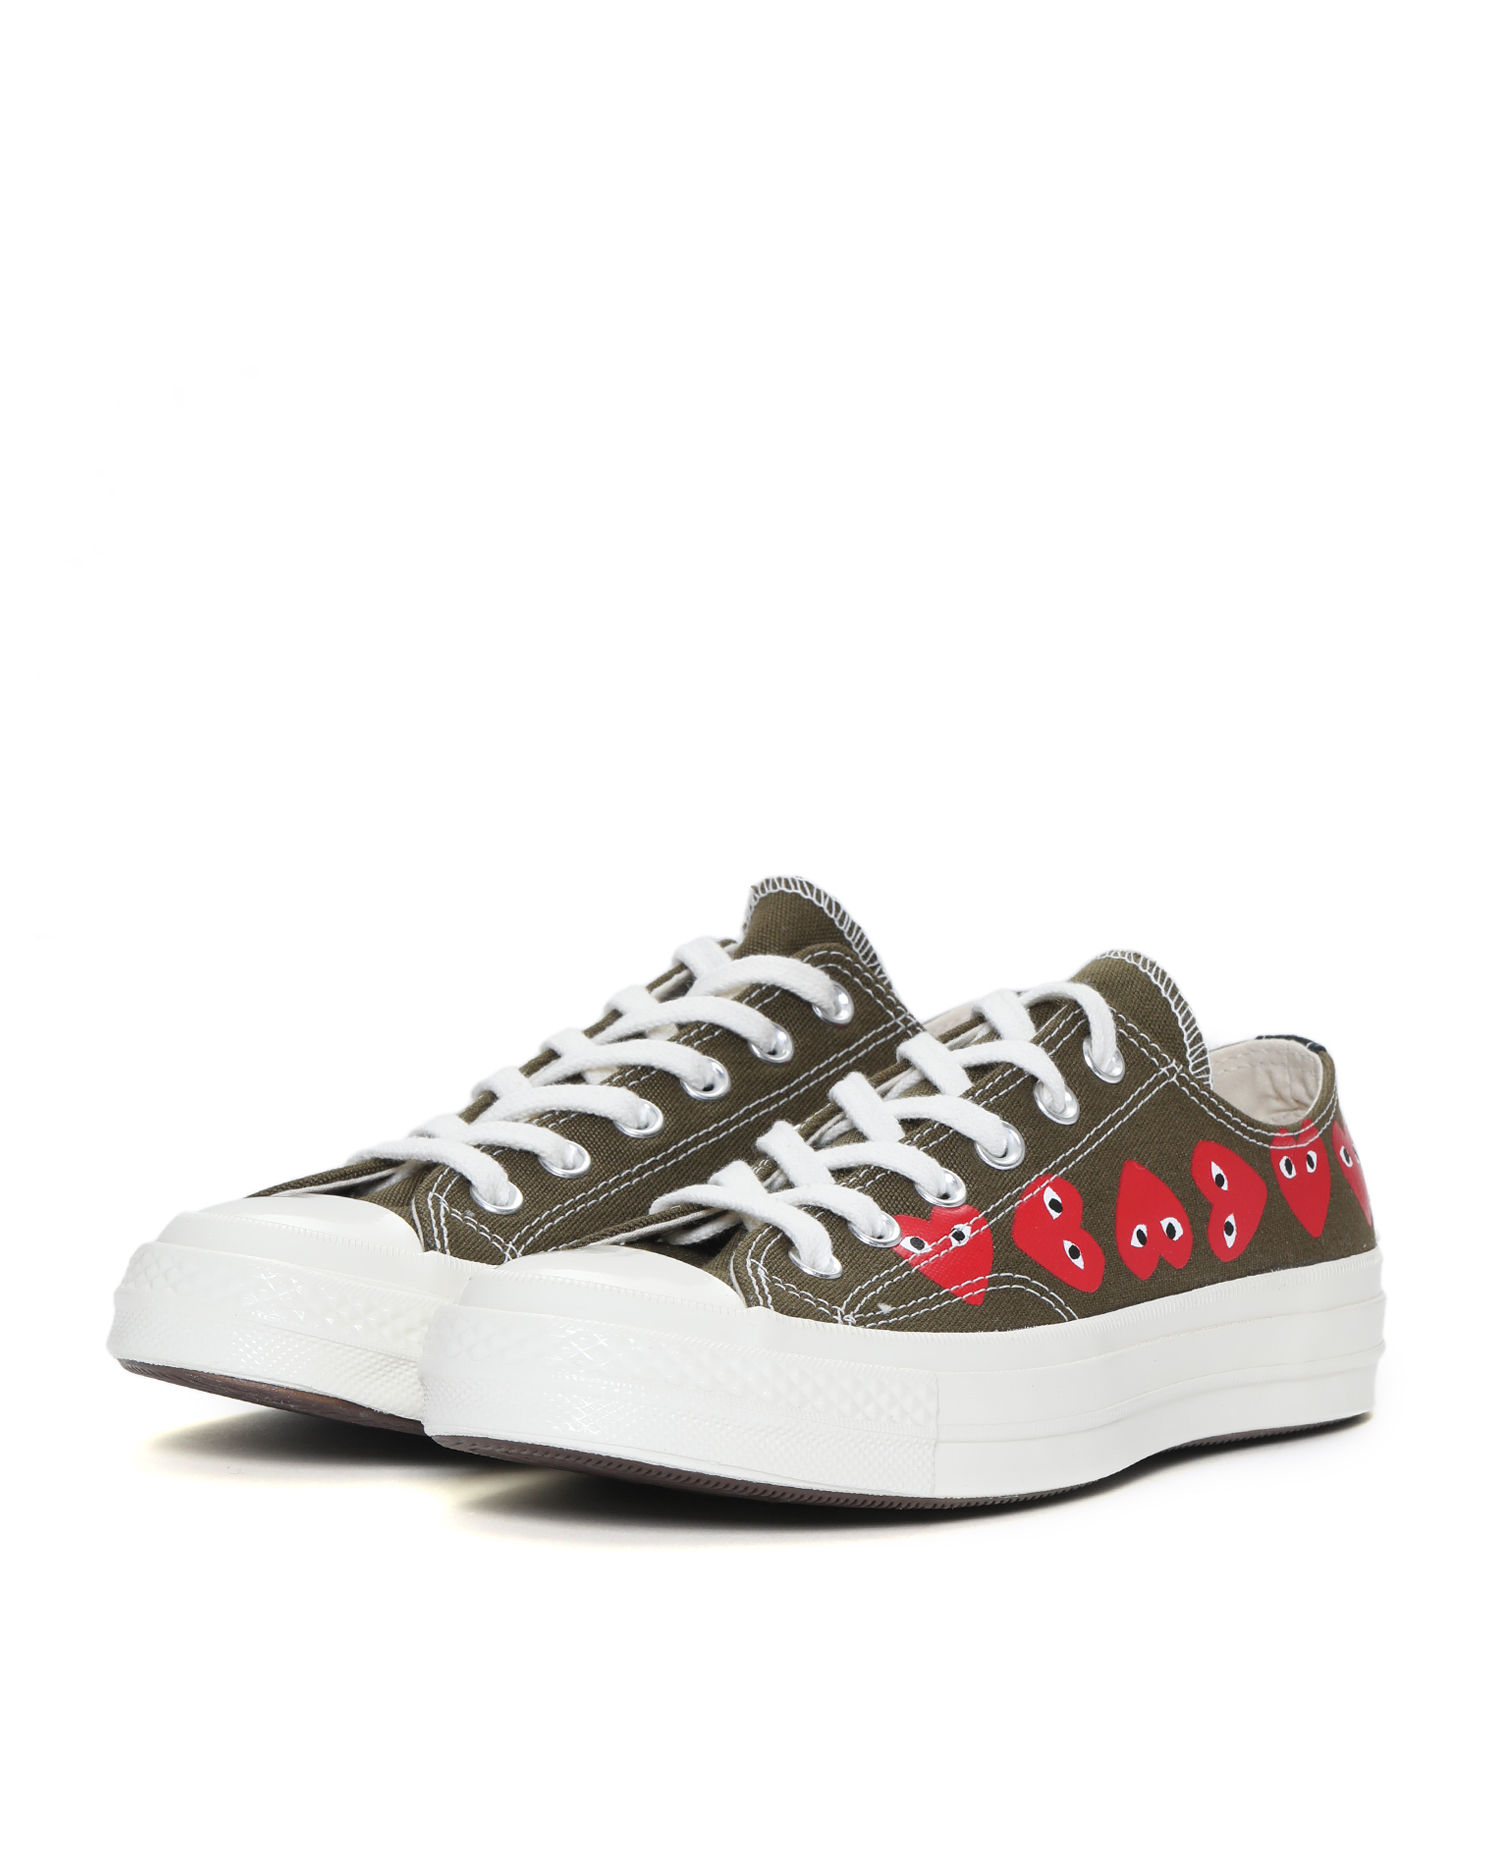 Chuck 70 Hi Comme Des Garcons PLAY Multi Hearts Green Goods lupon.gov.ph